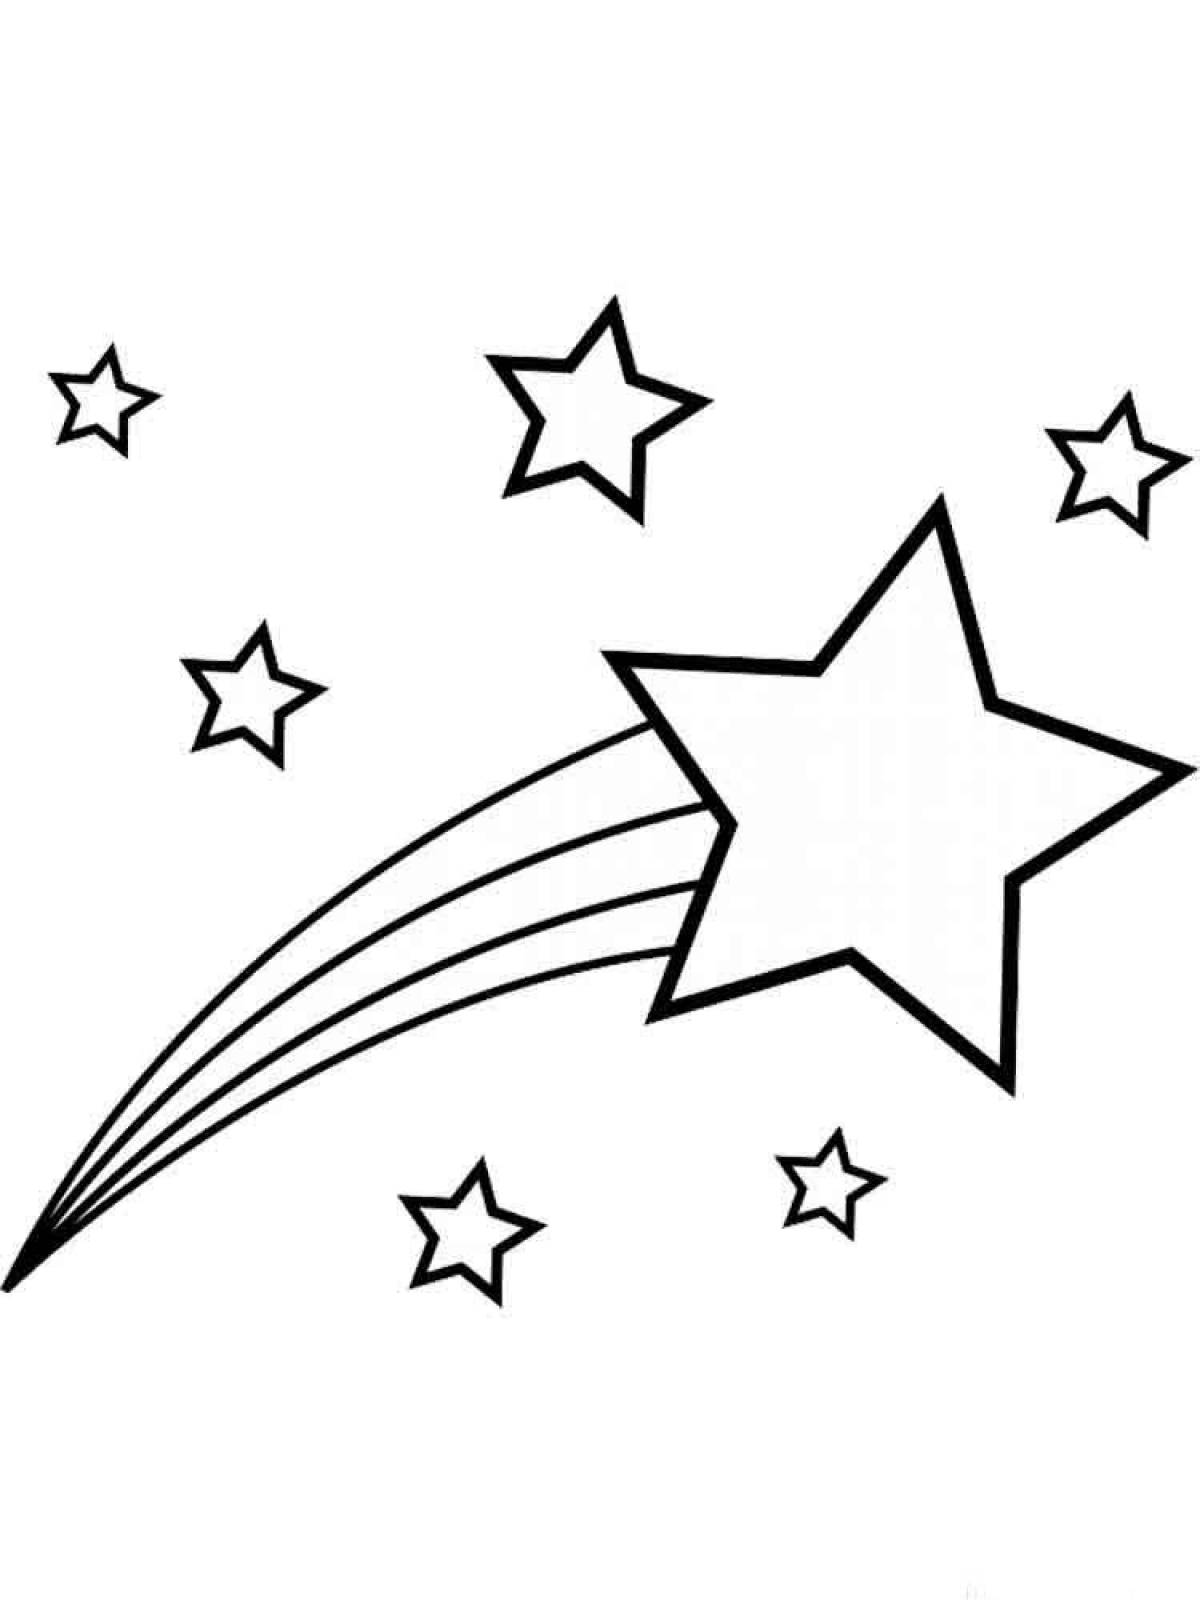 Colourful star pattern coloring page